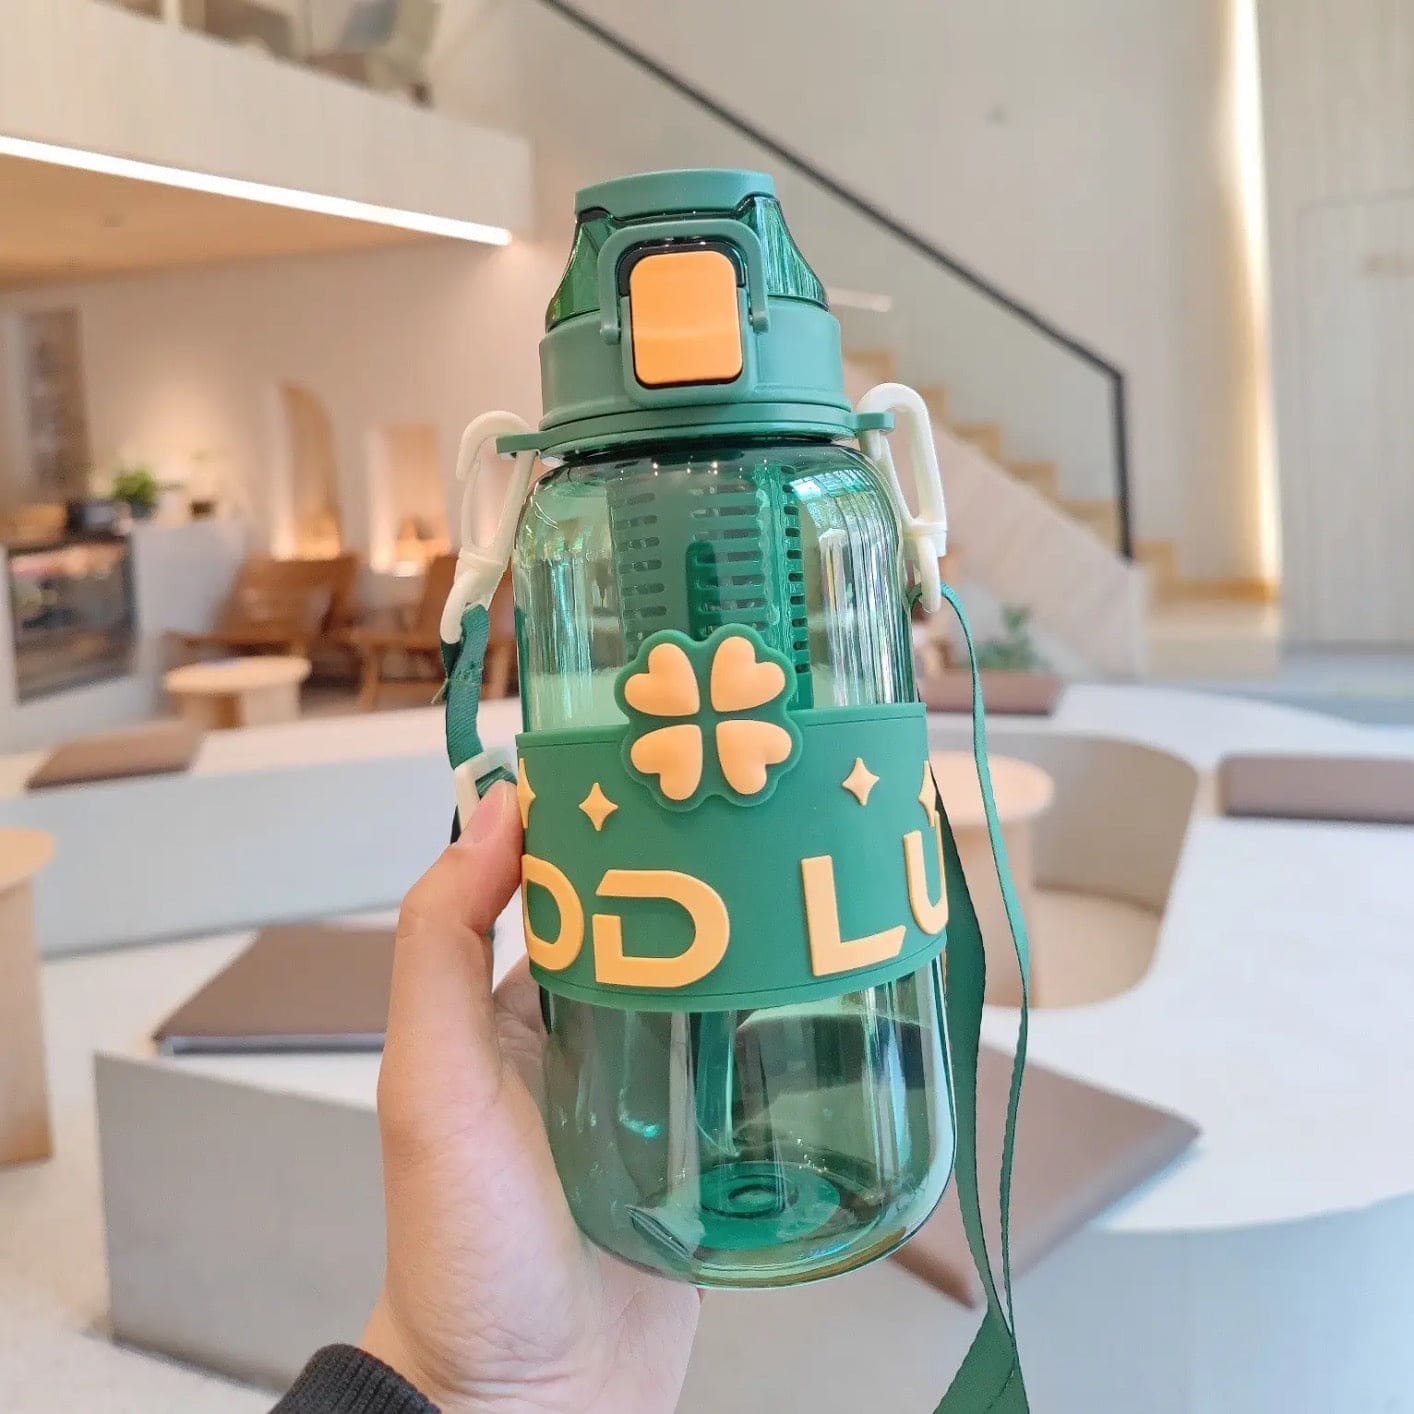 1L Student Summer Water Bottle, Fashion Plastic Bottle with Straw, Outdoor Sport with Tea Separator for Kids, 900ml Beverages Dispenser, Portable Drinking Water Bottle, Portable Drink Bottle For Outdoor, Kids Water Sippy Cup